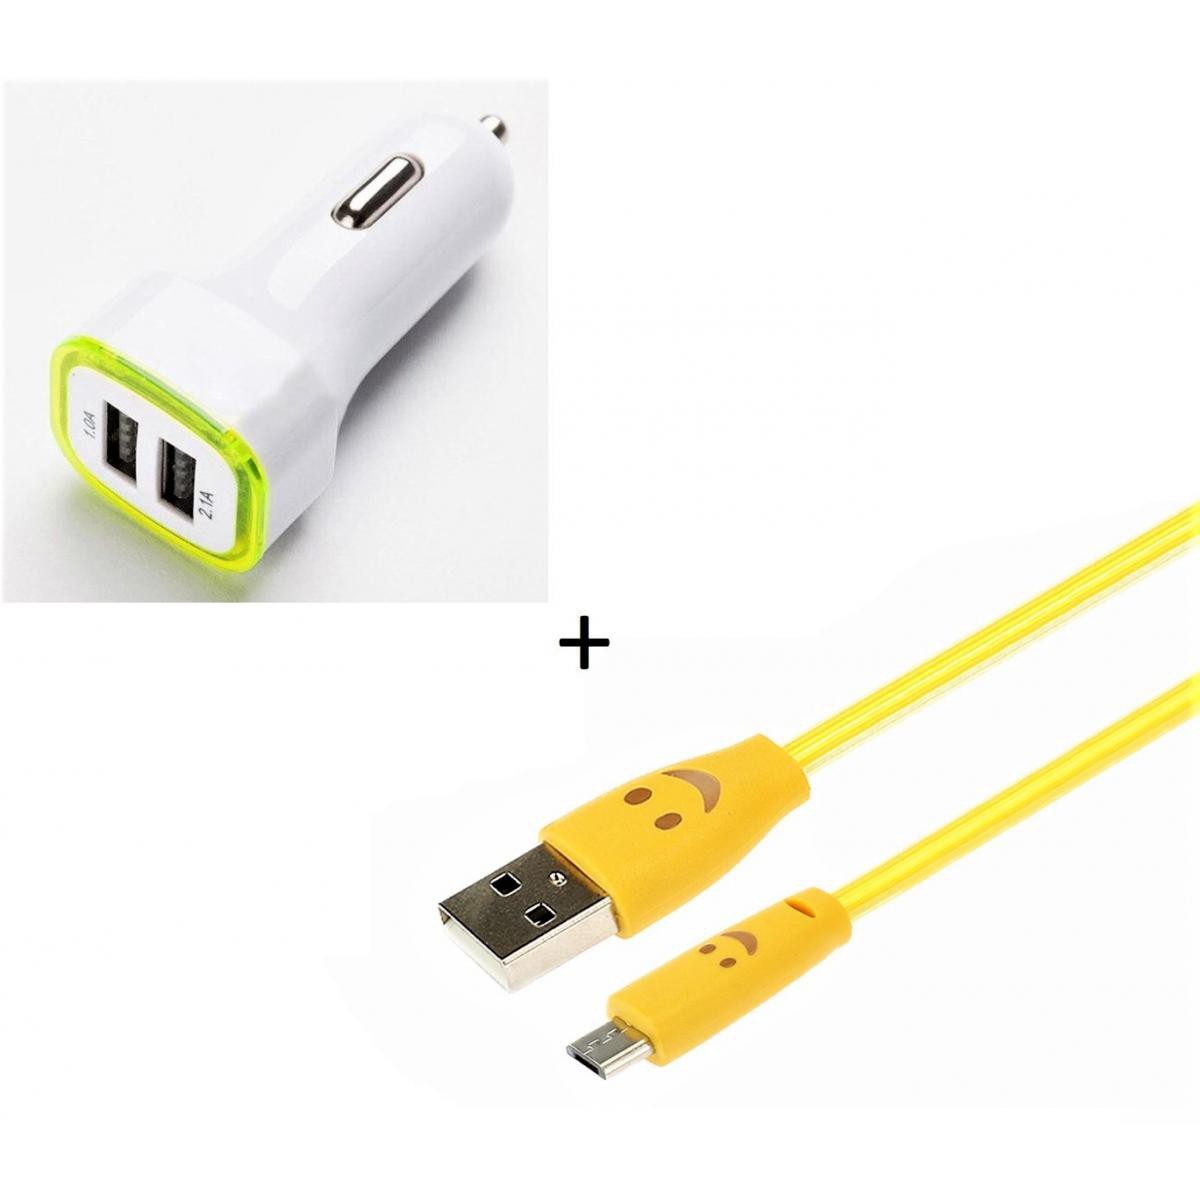 Shot - Pack Chargeur Voiture pour "SAMSUNG Galaxy A01" Smartphone Micro USB (Cable Smiley + Double Adaptateur LED Allume Cigare) (JAUNE) - Chargeur Voiture 12V